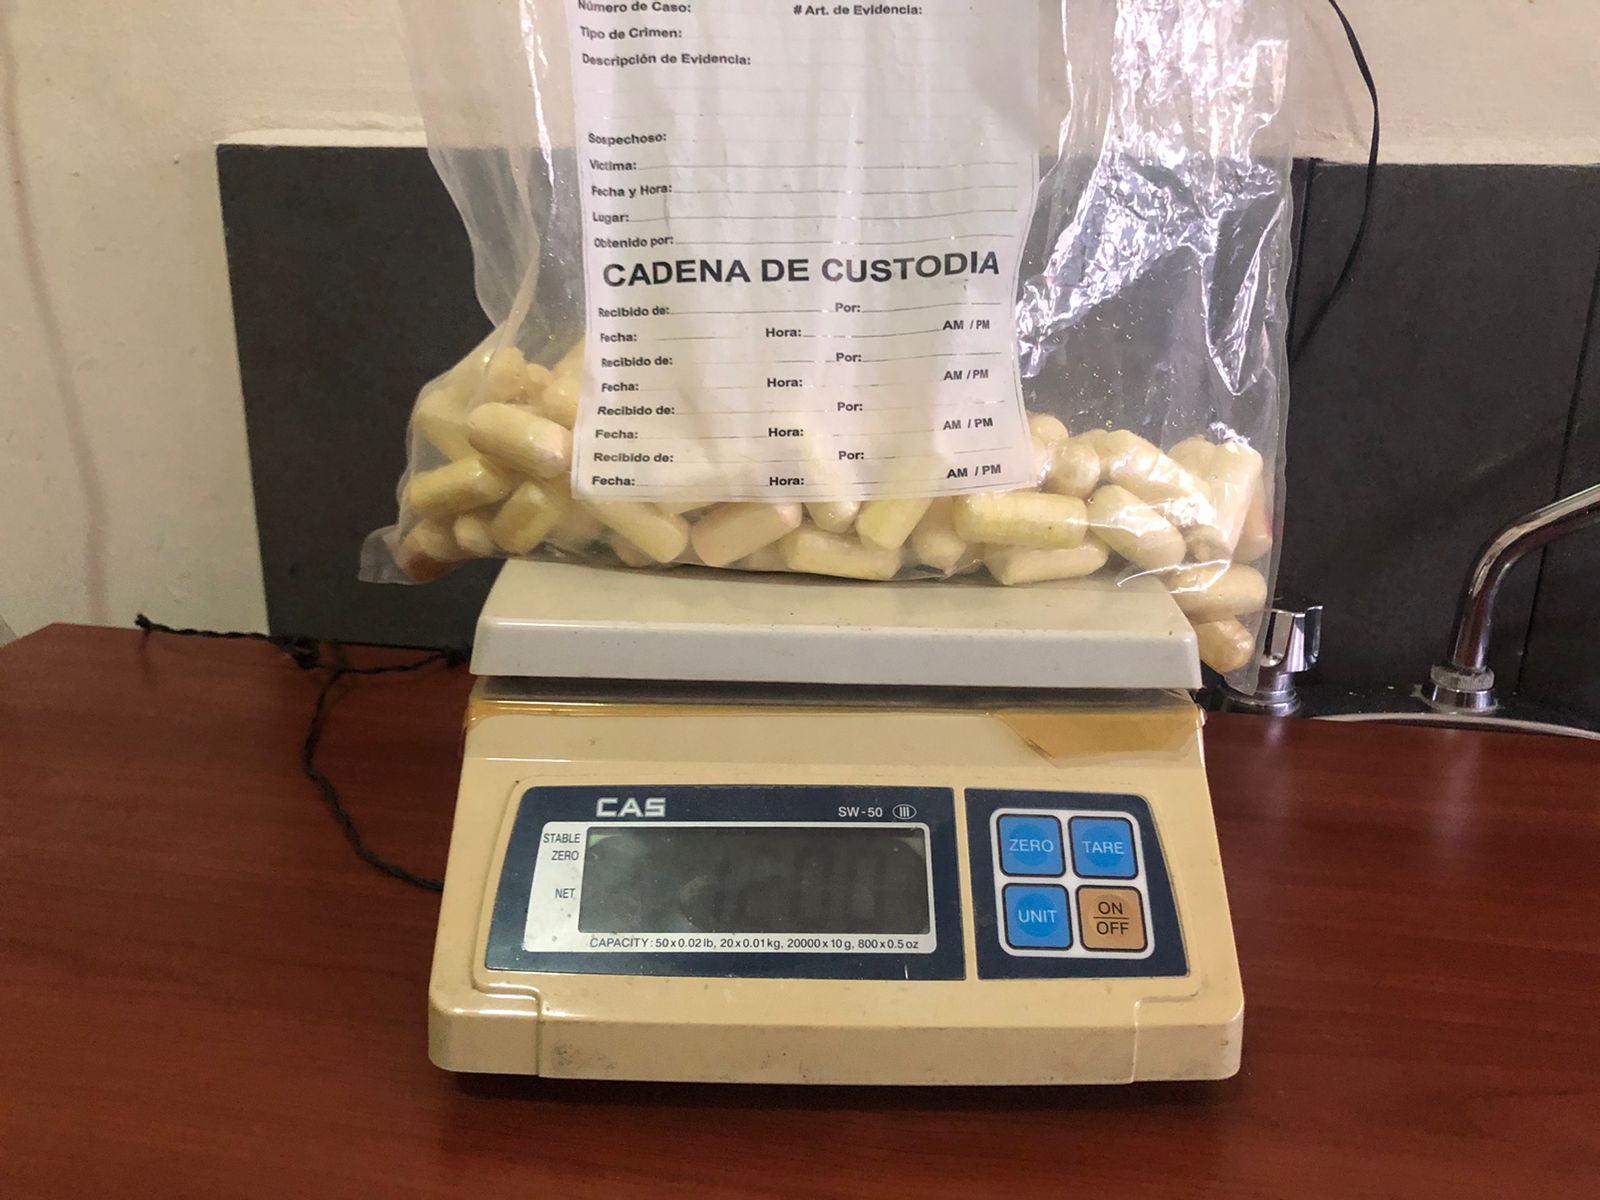 They arrest a Dominican-Dutch man with 99 bags presumably cocaine in the AILA